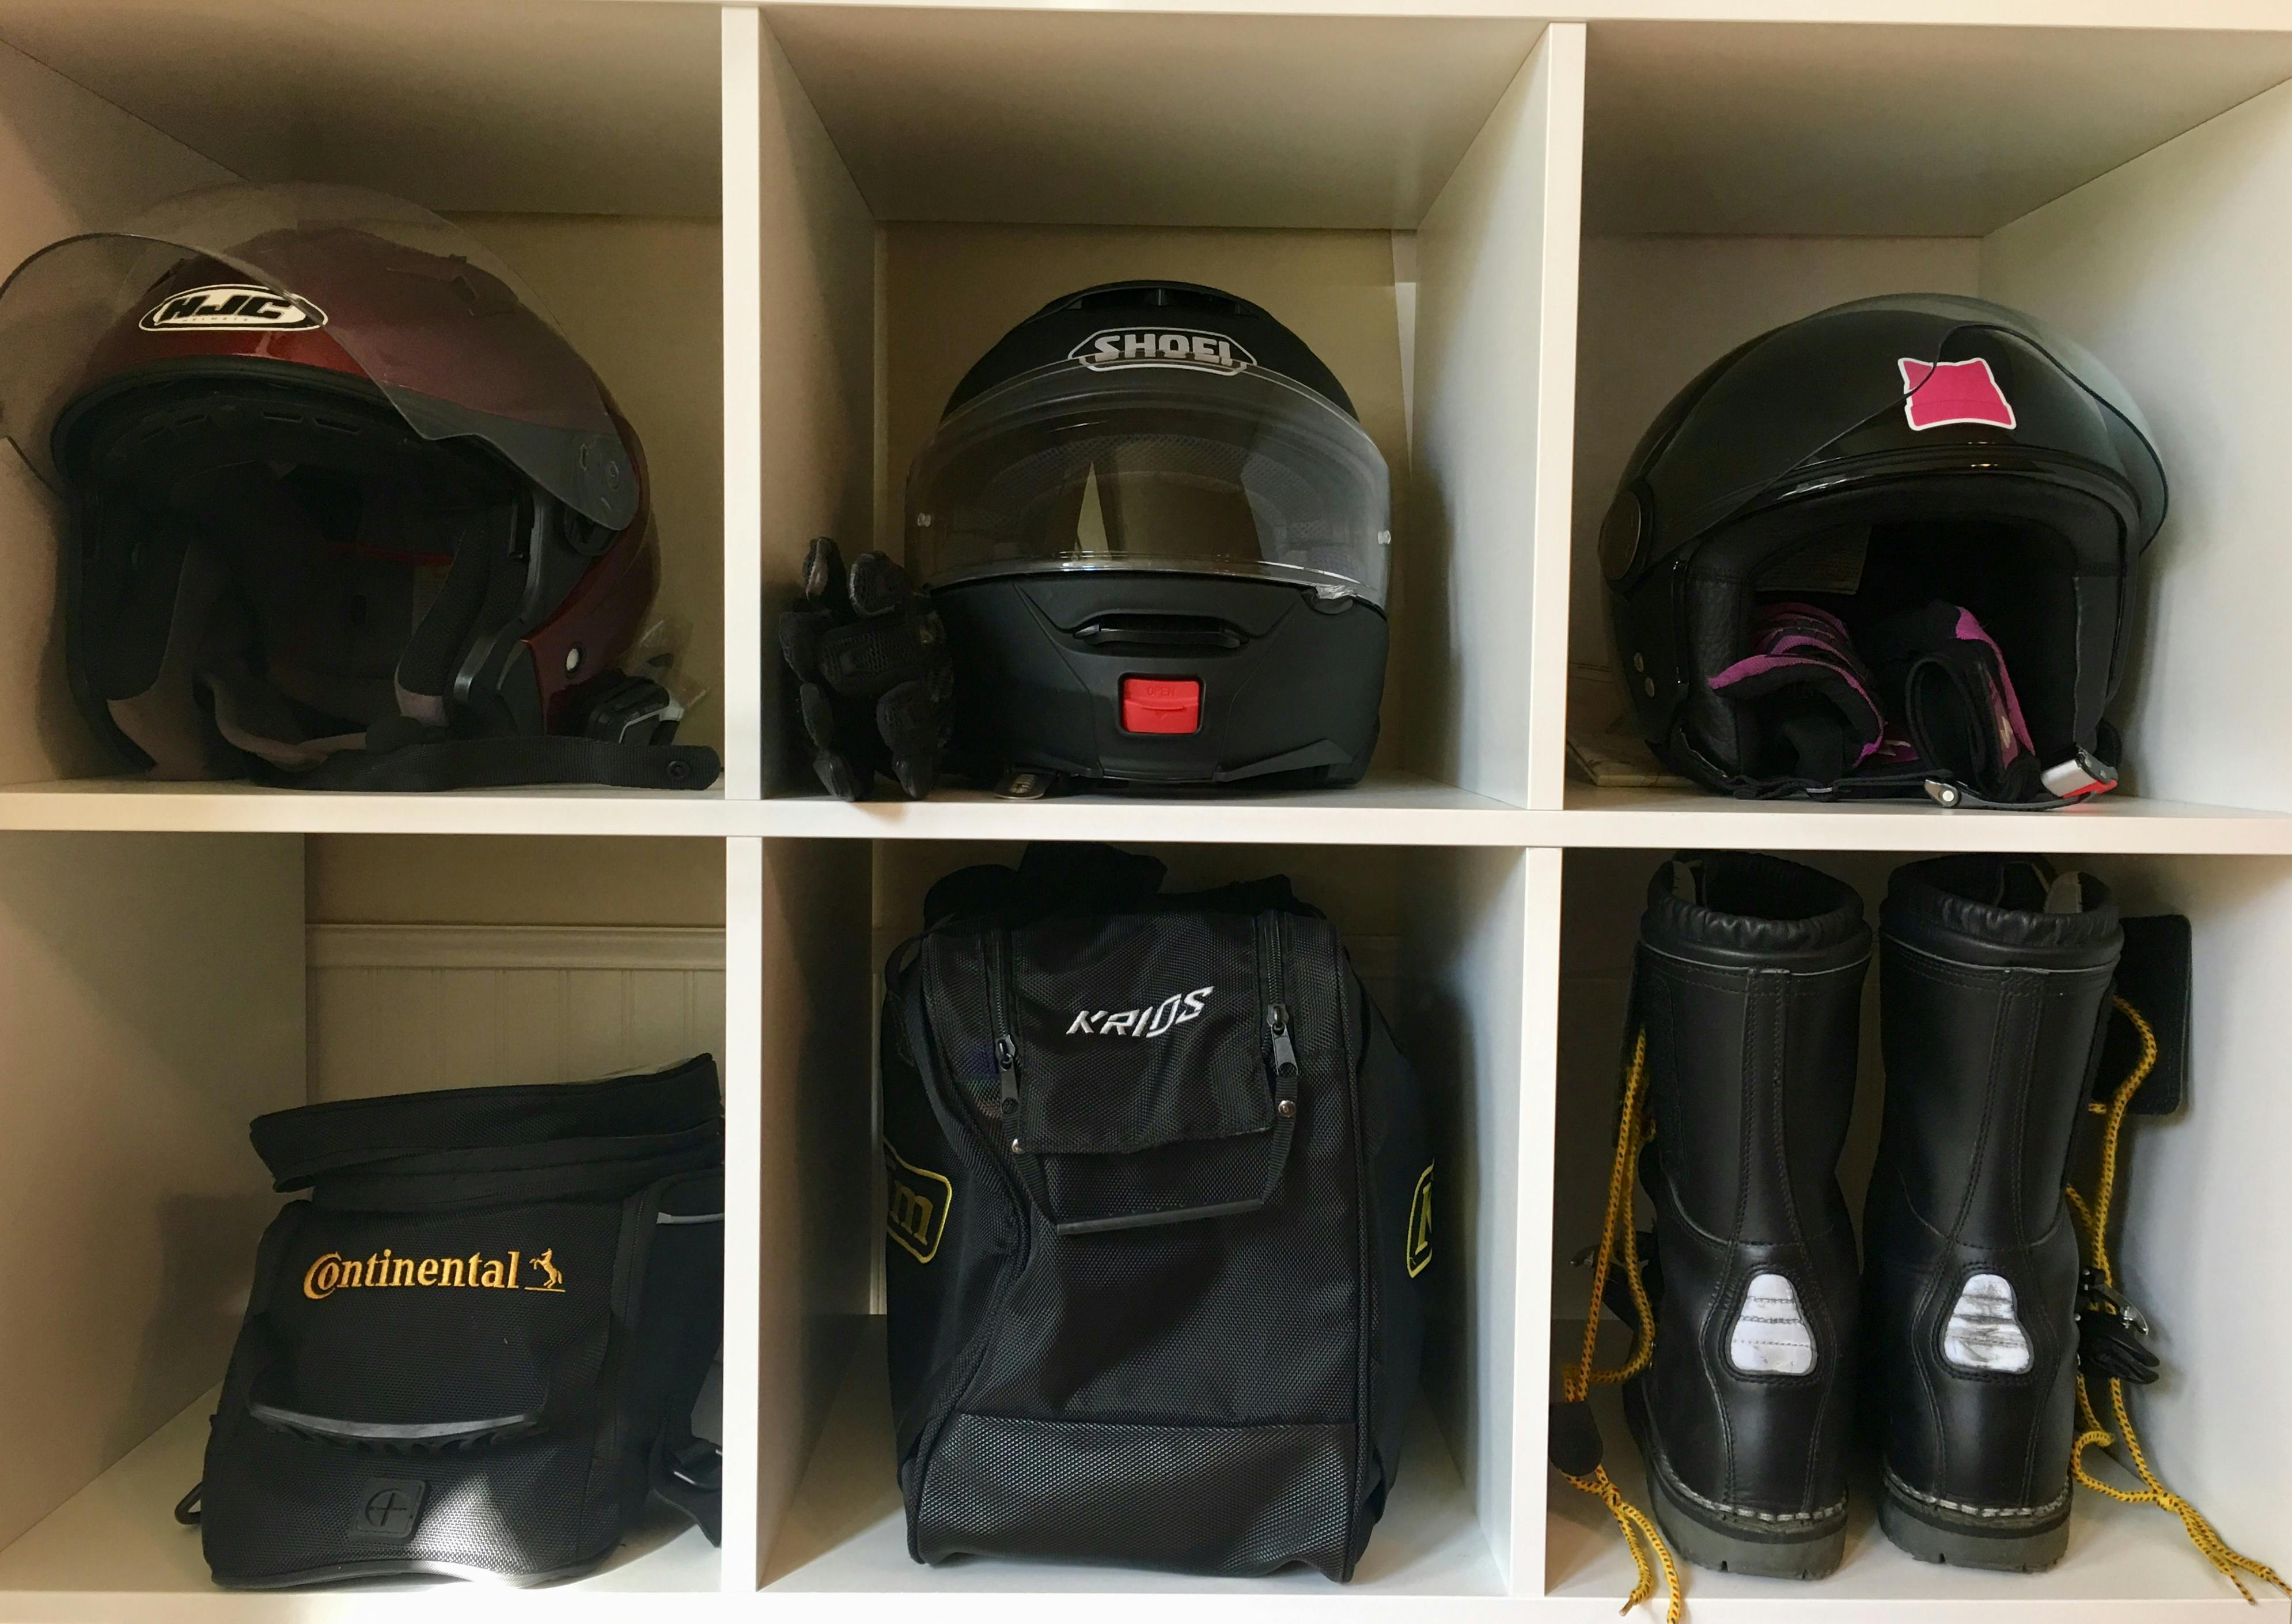 3 helmets, 2 bags and a pair of boots organised and separated